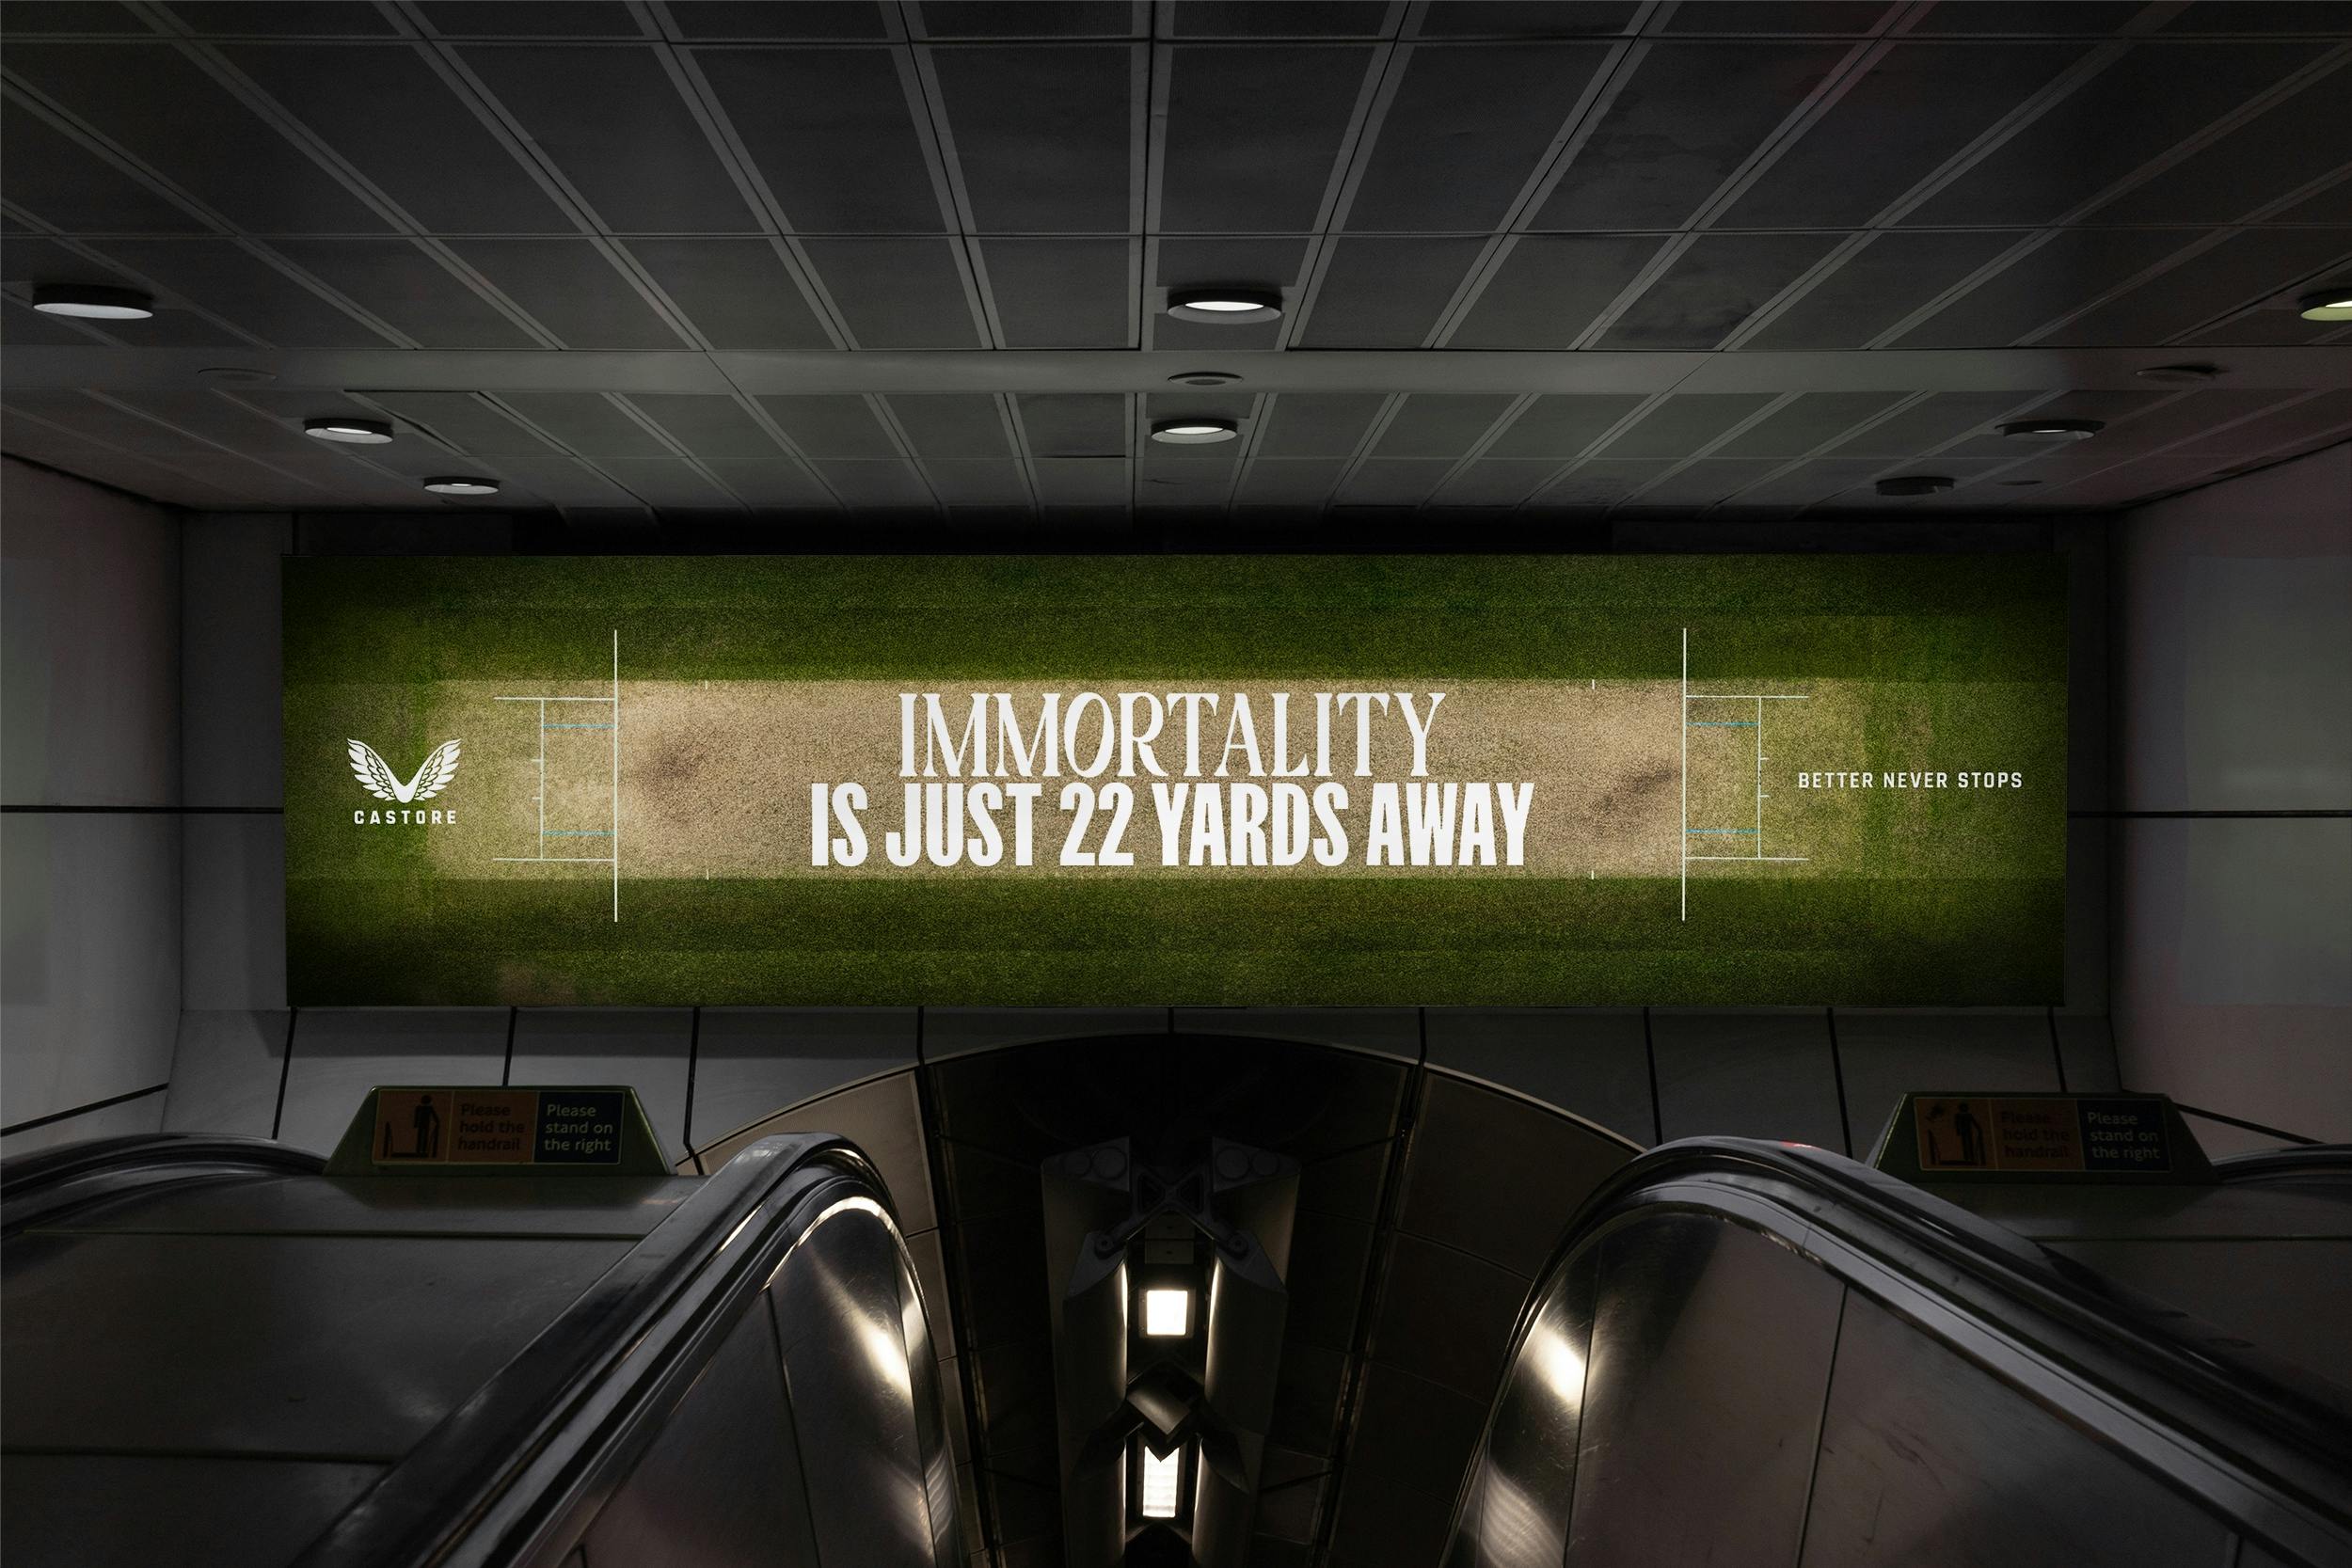 An advertisement above an escalator in the London Underground. The advert is a top down shot of a cricket wicket with the text top "Immortality is just 22 yards away".